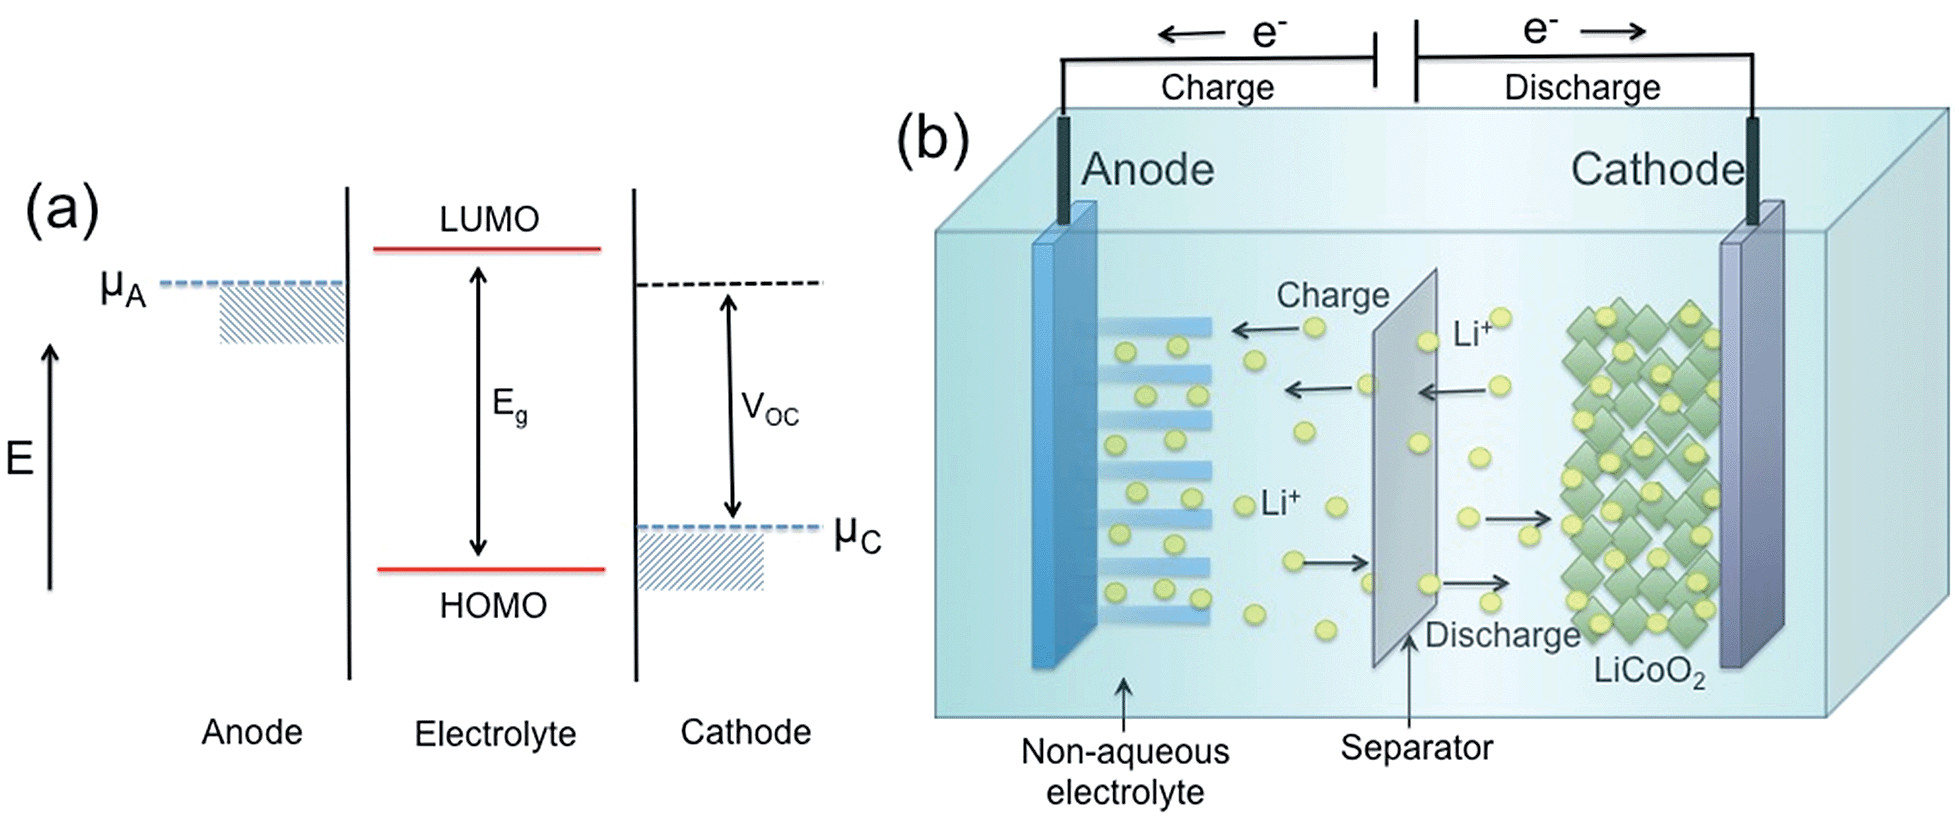 b schematic diagram of the lithium intercalation de intercalation reaction mechanism in a rechargeable lithium ion battery containing solid electrodes